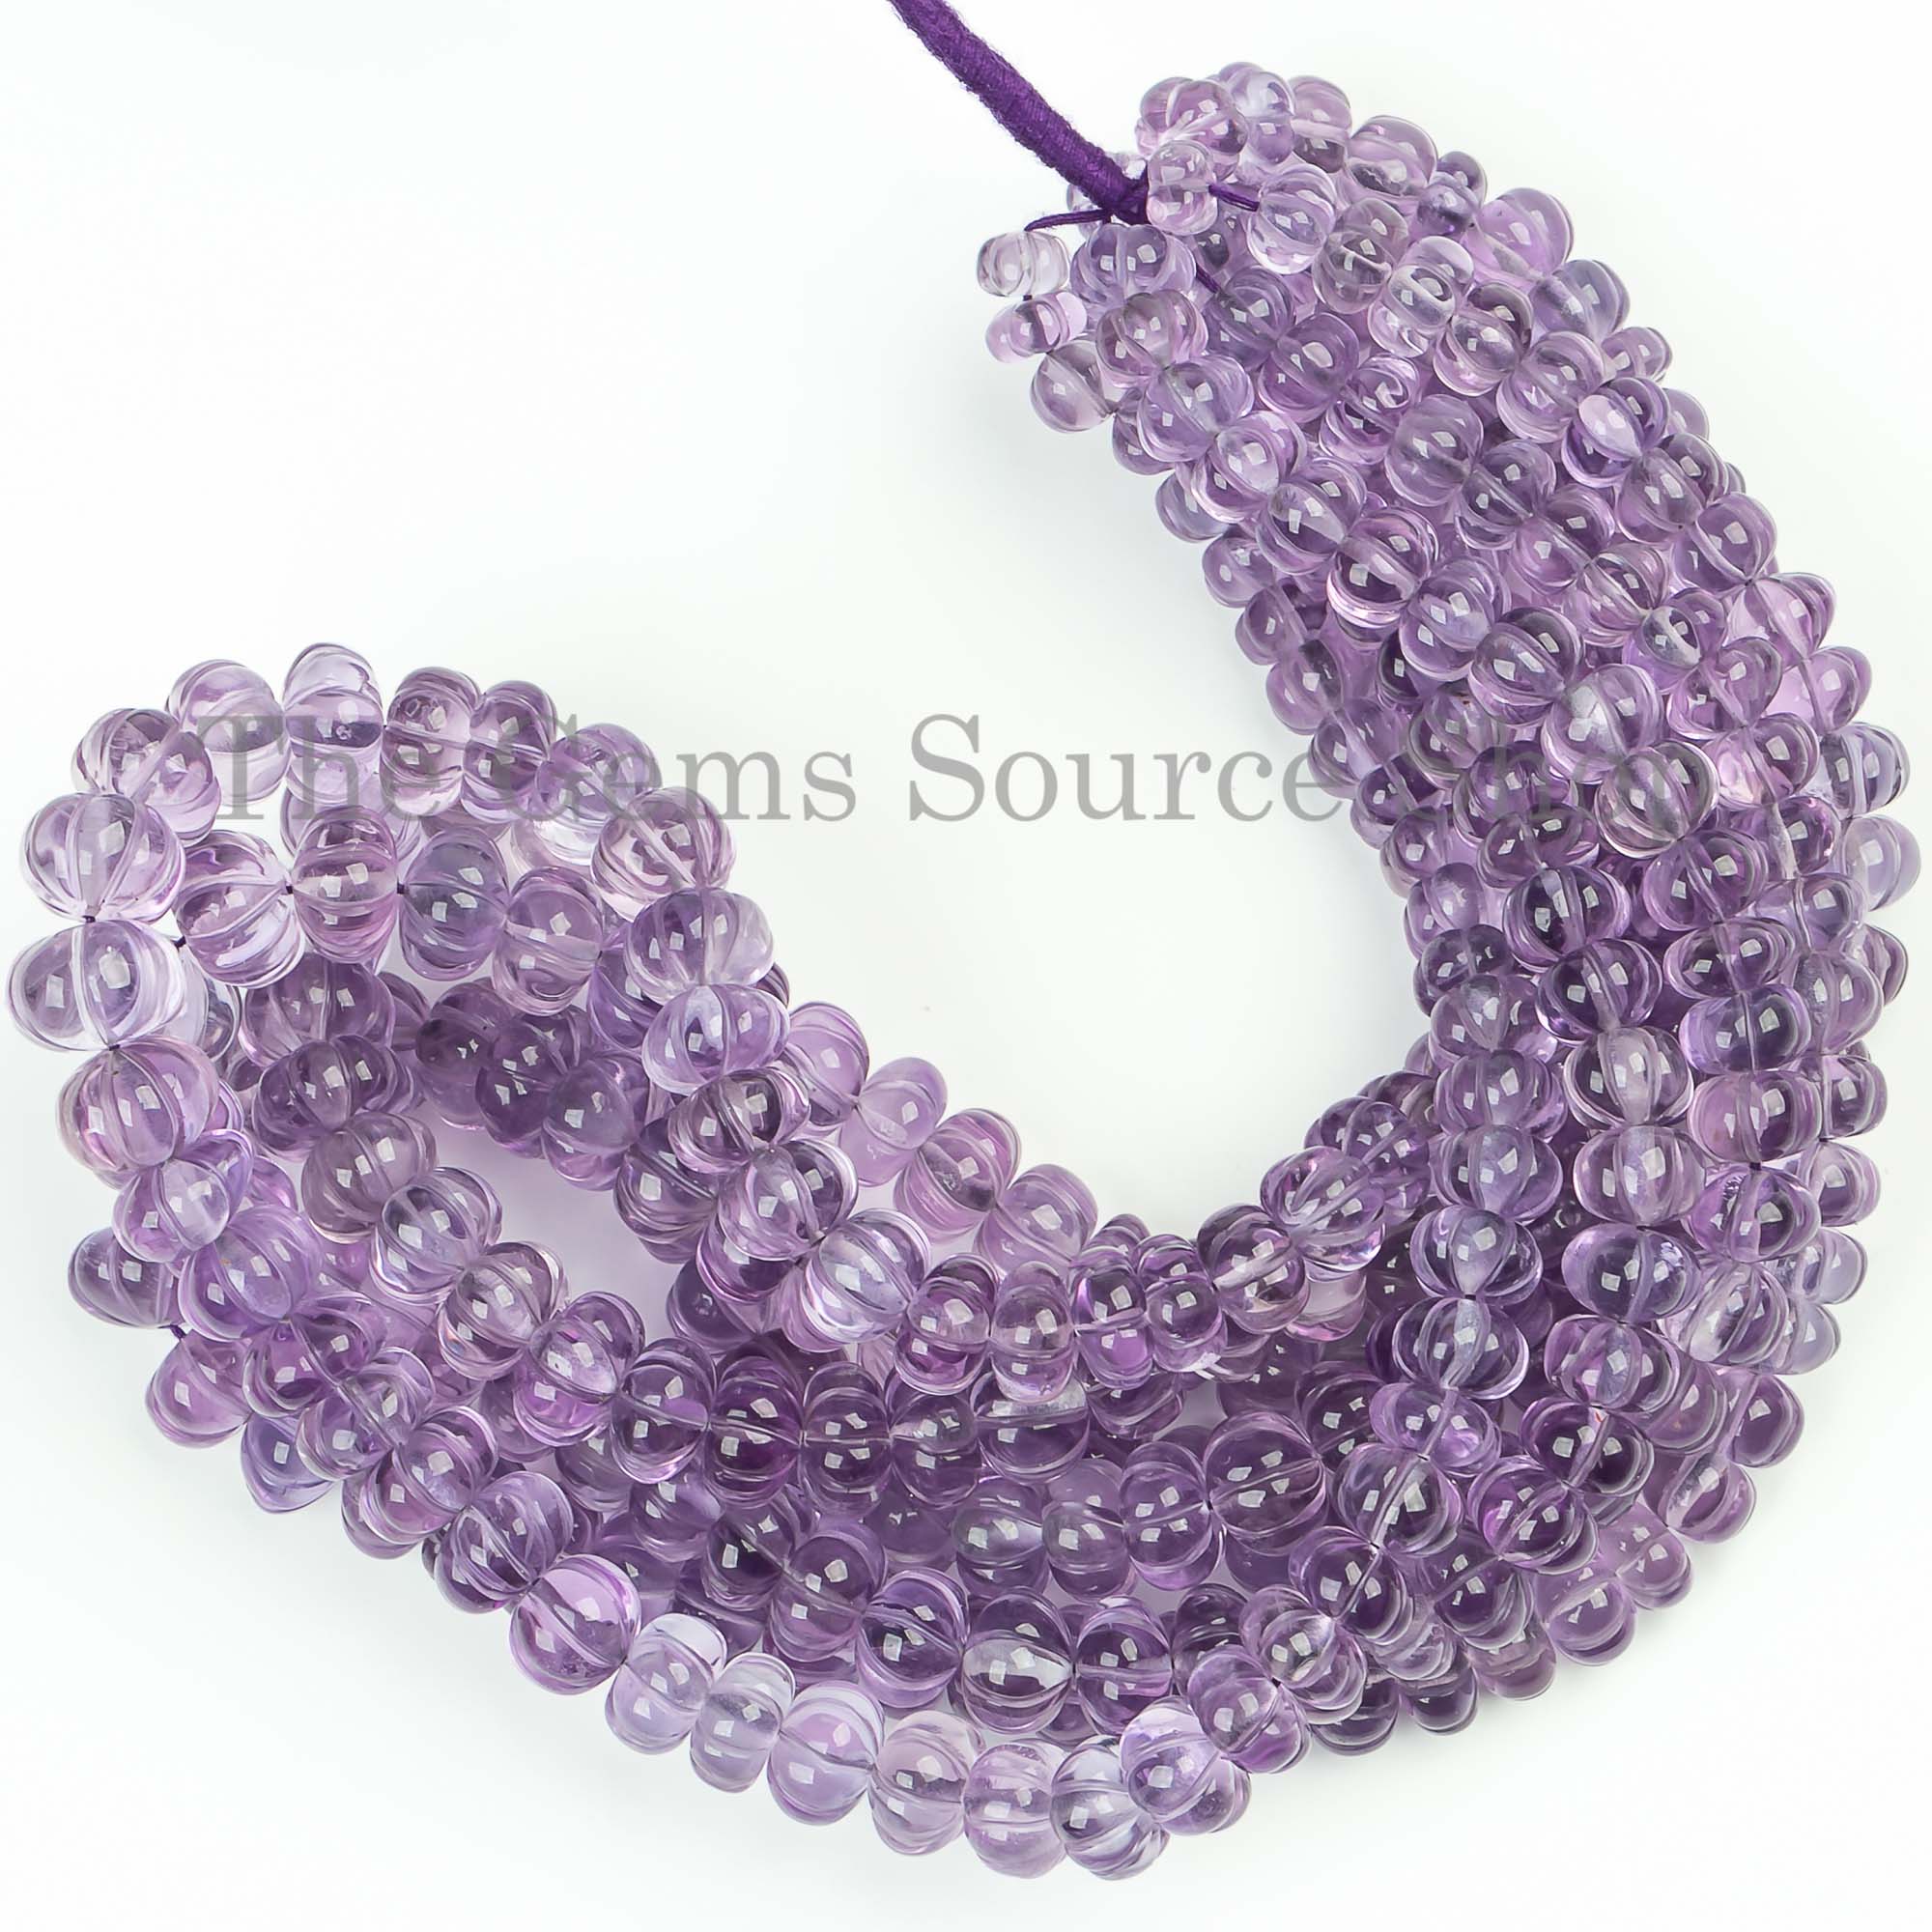 Natural Amethyst Beads, 7-12mm Amethyst Smooth Carving Beads, Pumpkin Melon Shape Beads